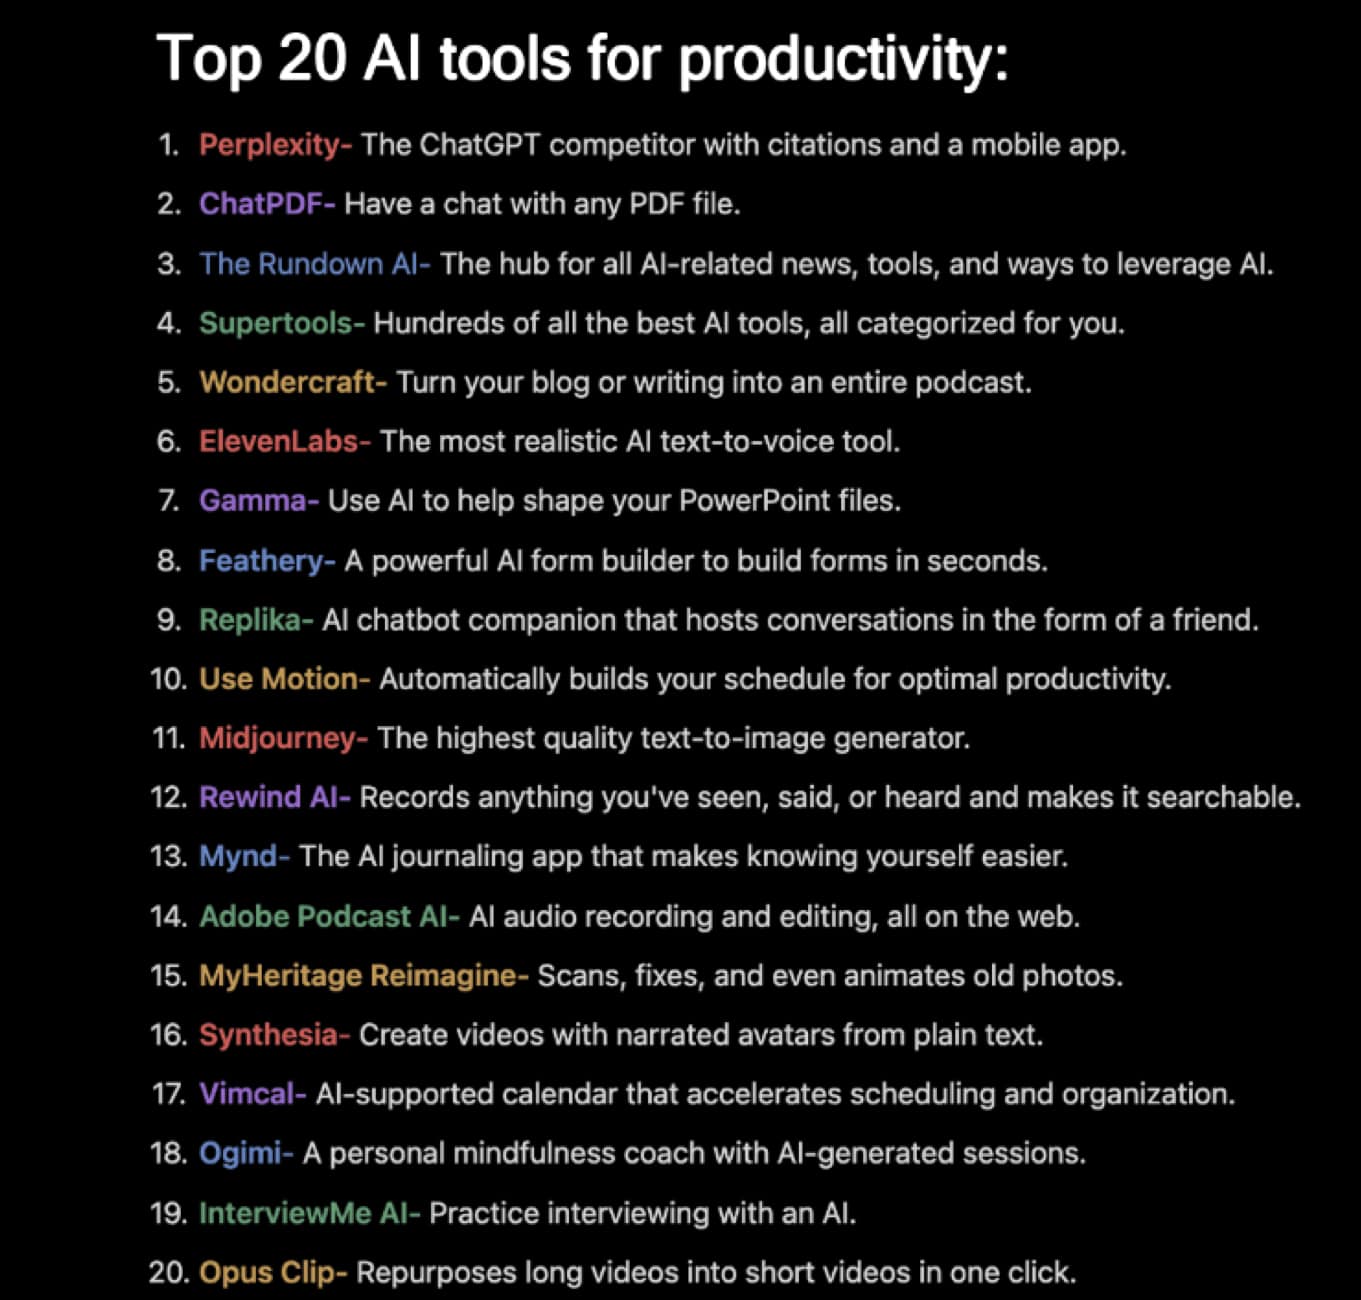 Top 20 AI tools for productivity